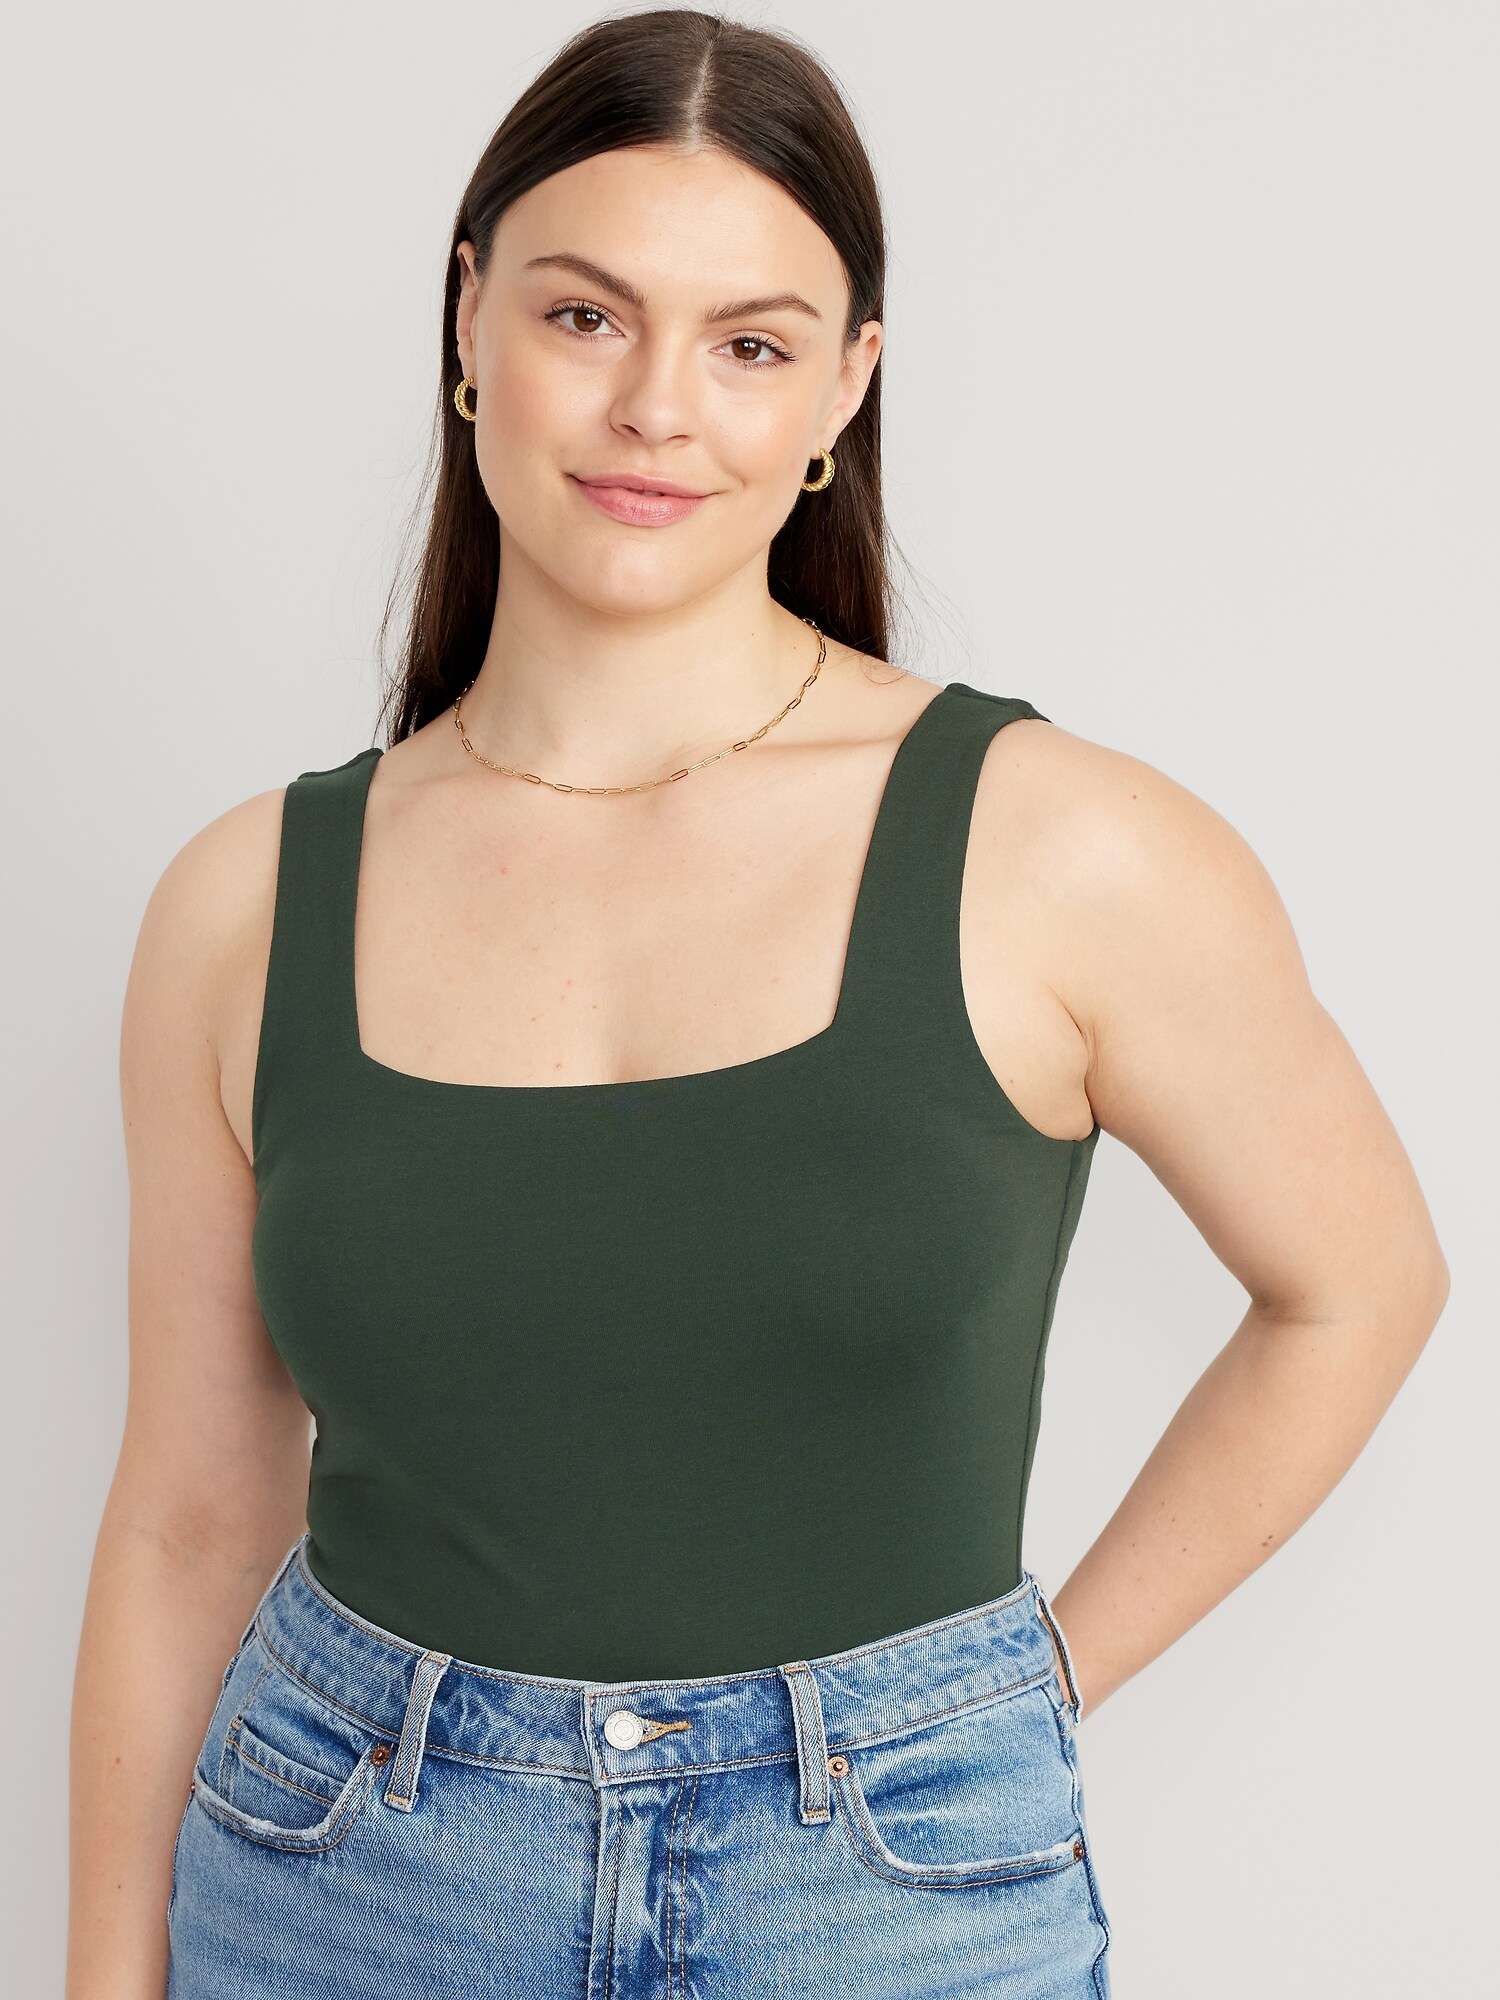 The Classic Gnarly Company Tank Top Bodysuit